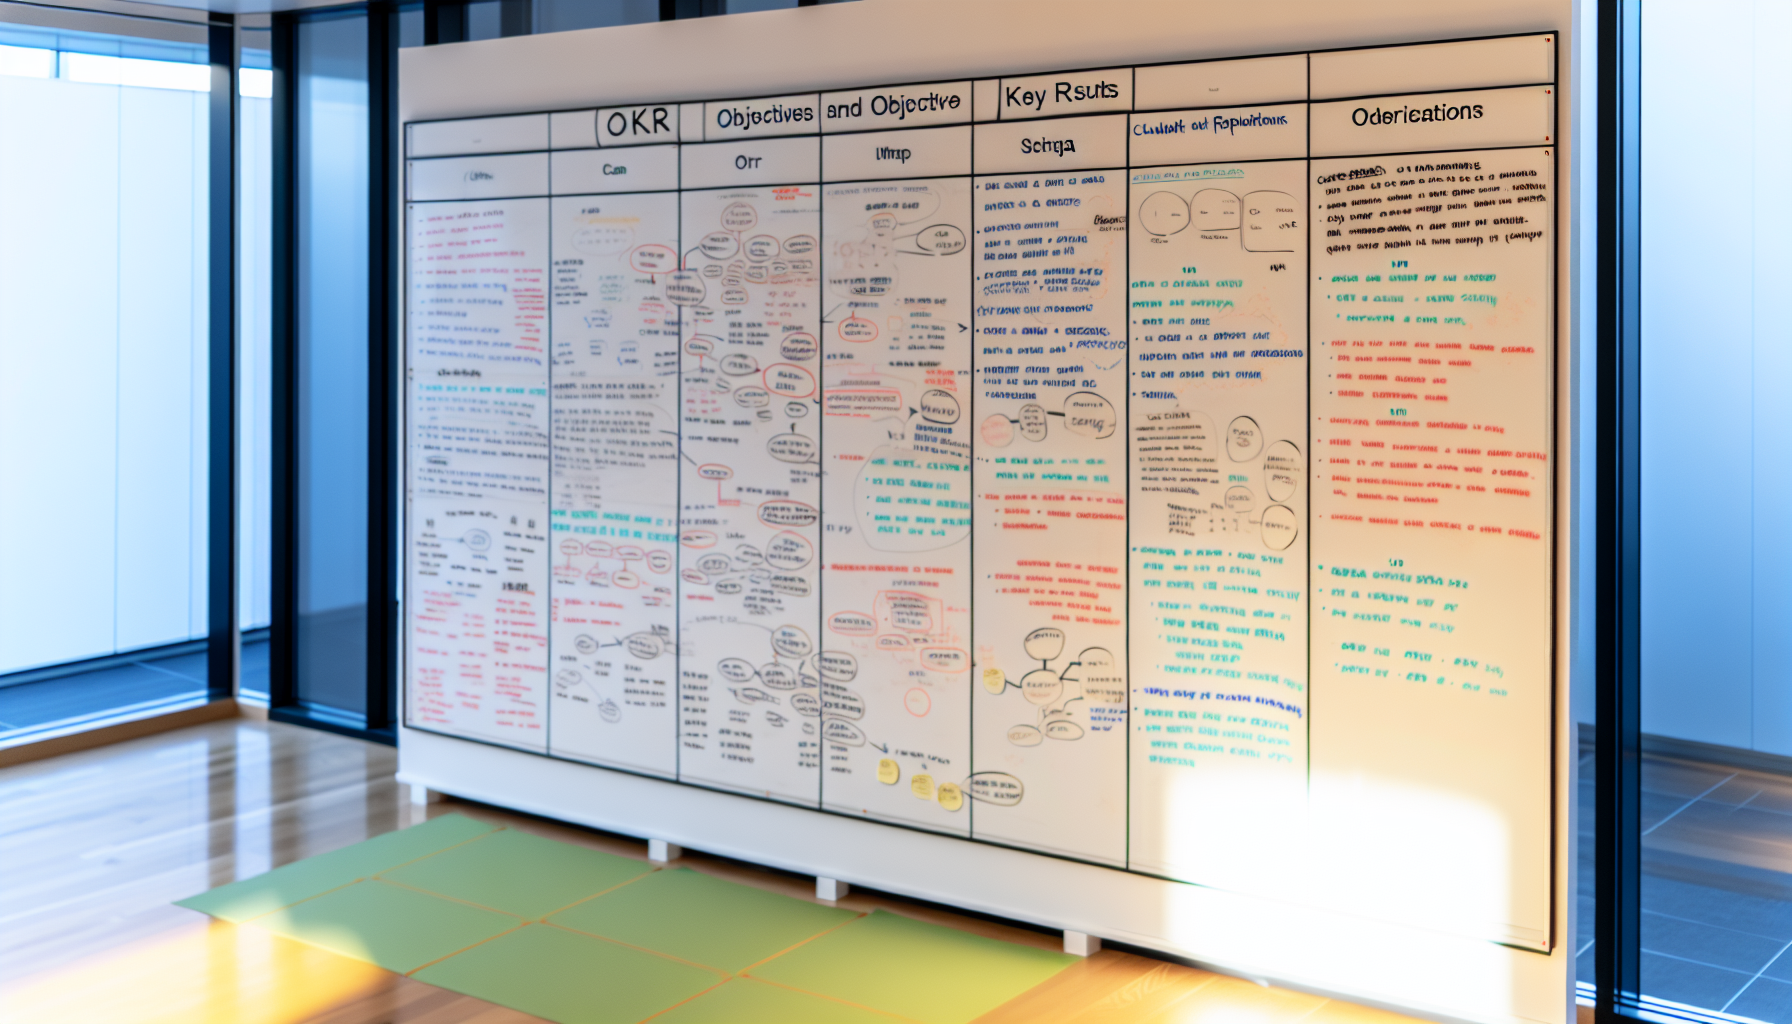 Photo of a whiteboard with examples and case studies of successful OKR implementations